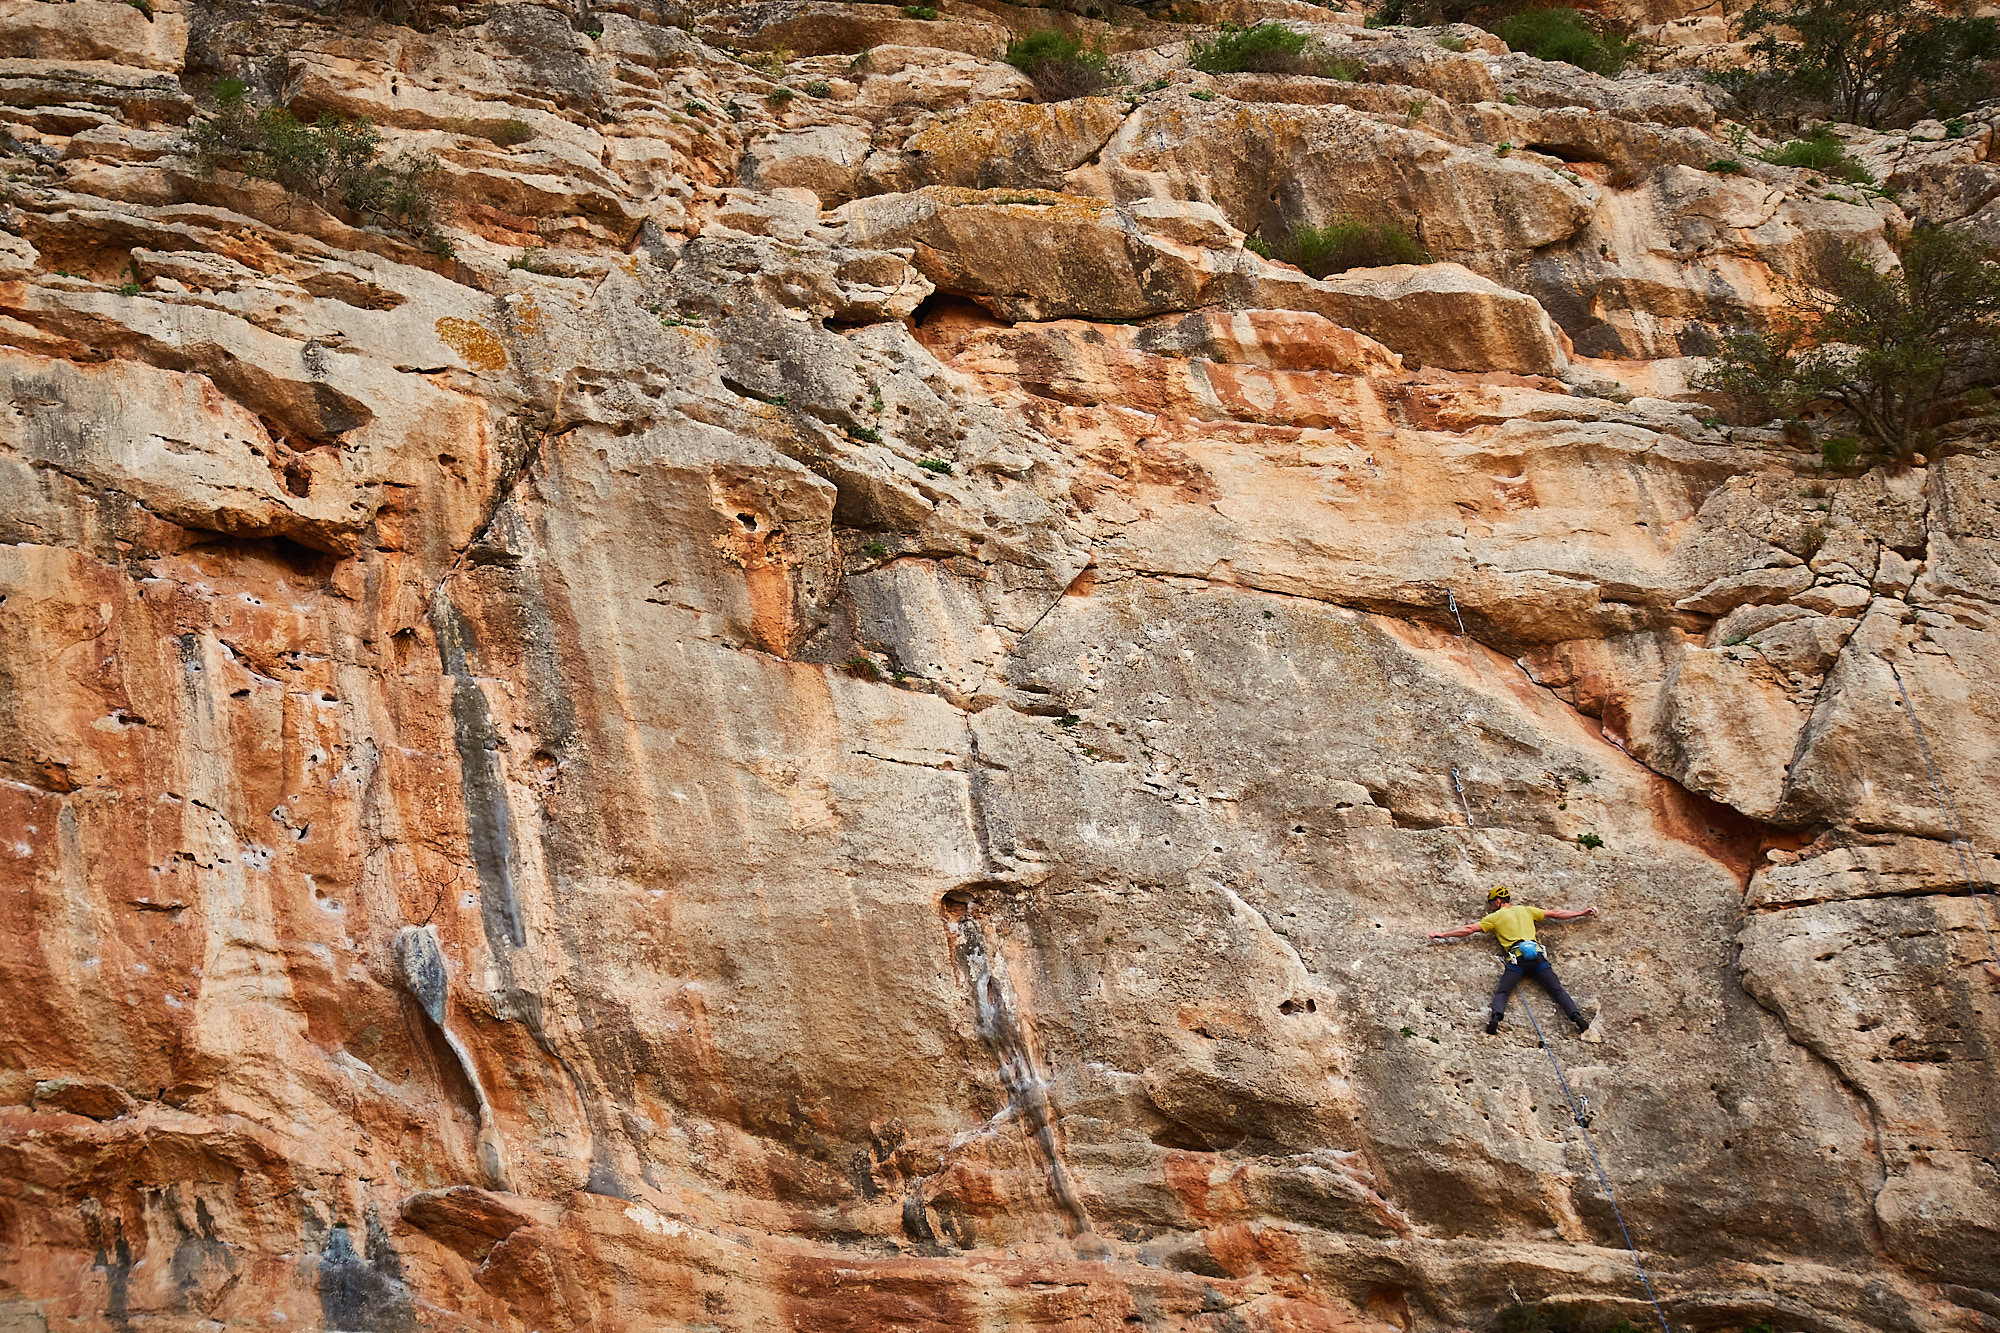 A climber sport climbing on a grey and orange limestone cliff in southern Spain with no hands on the rock